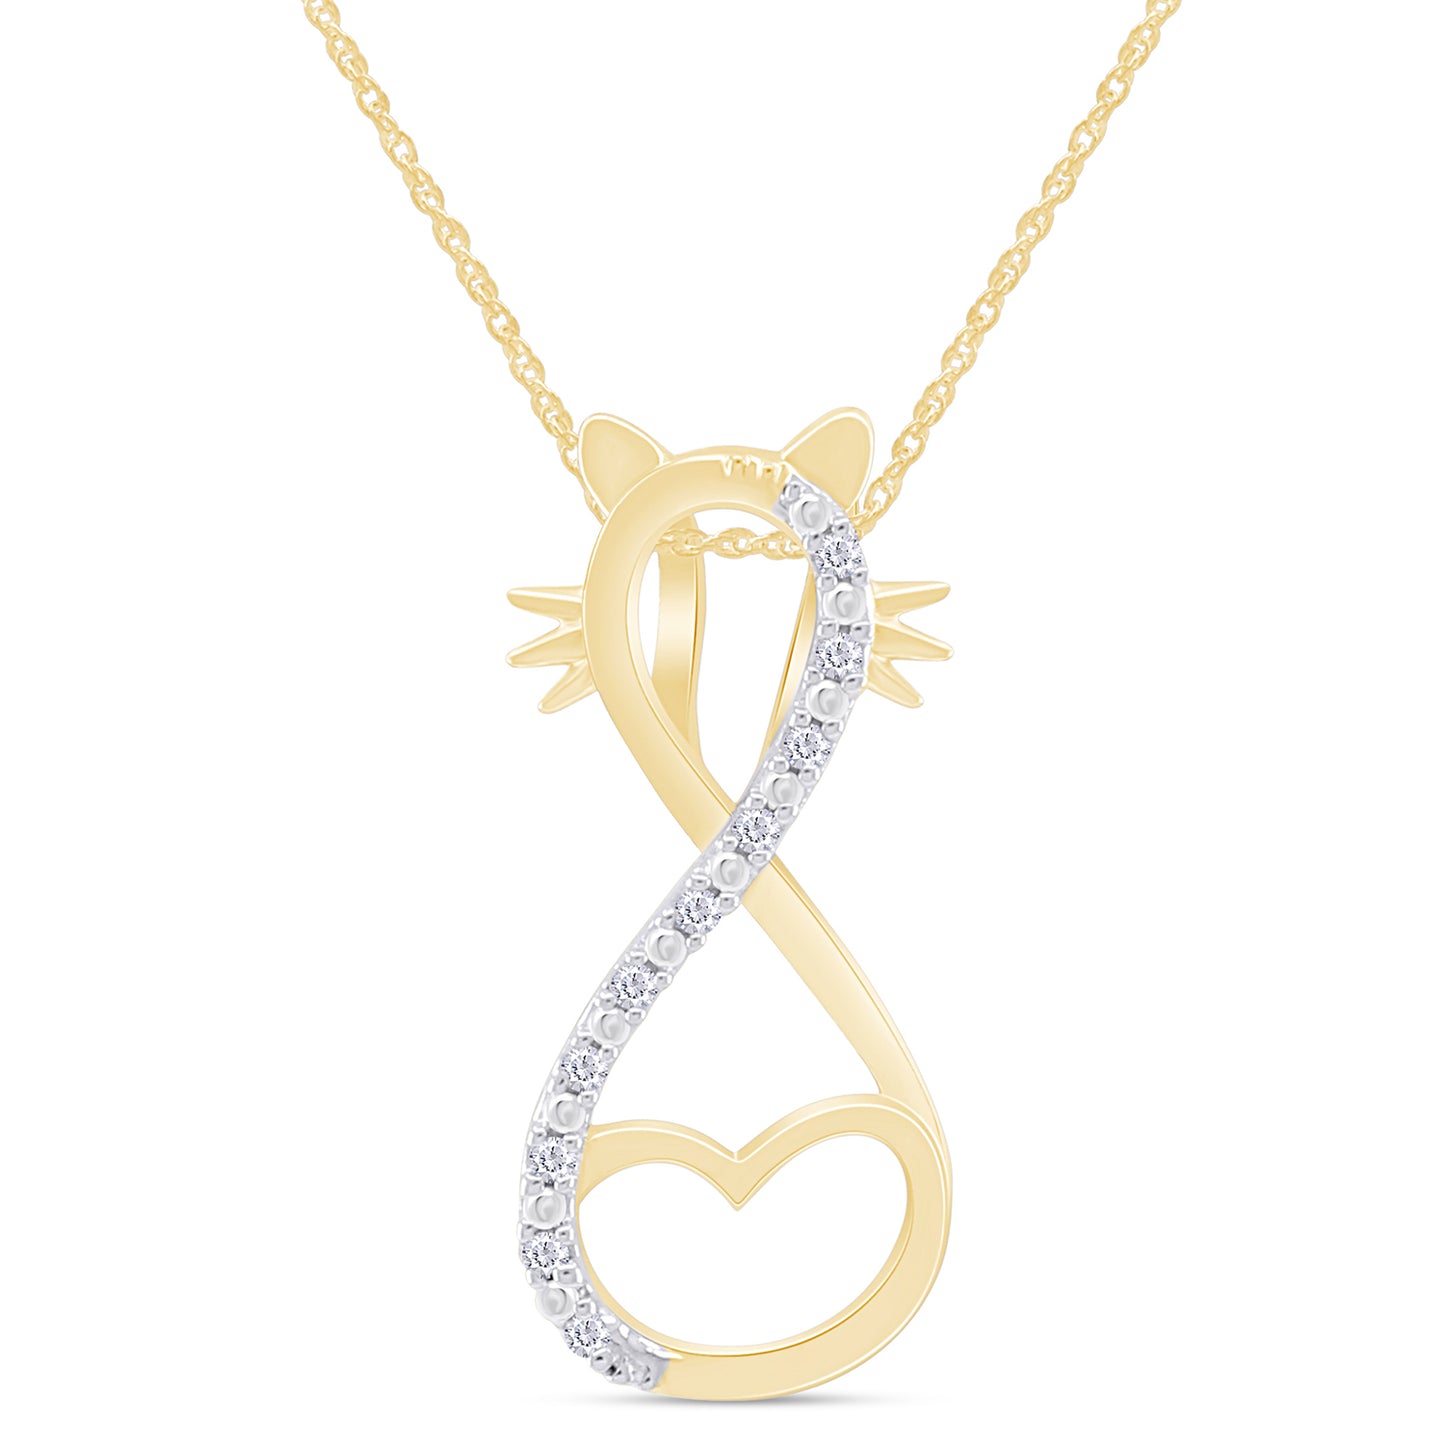 Round White Natural Diamond Accent Infinity Love Heart Cat Pendant Necklace In 925 Sterling Silver